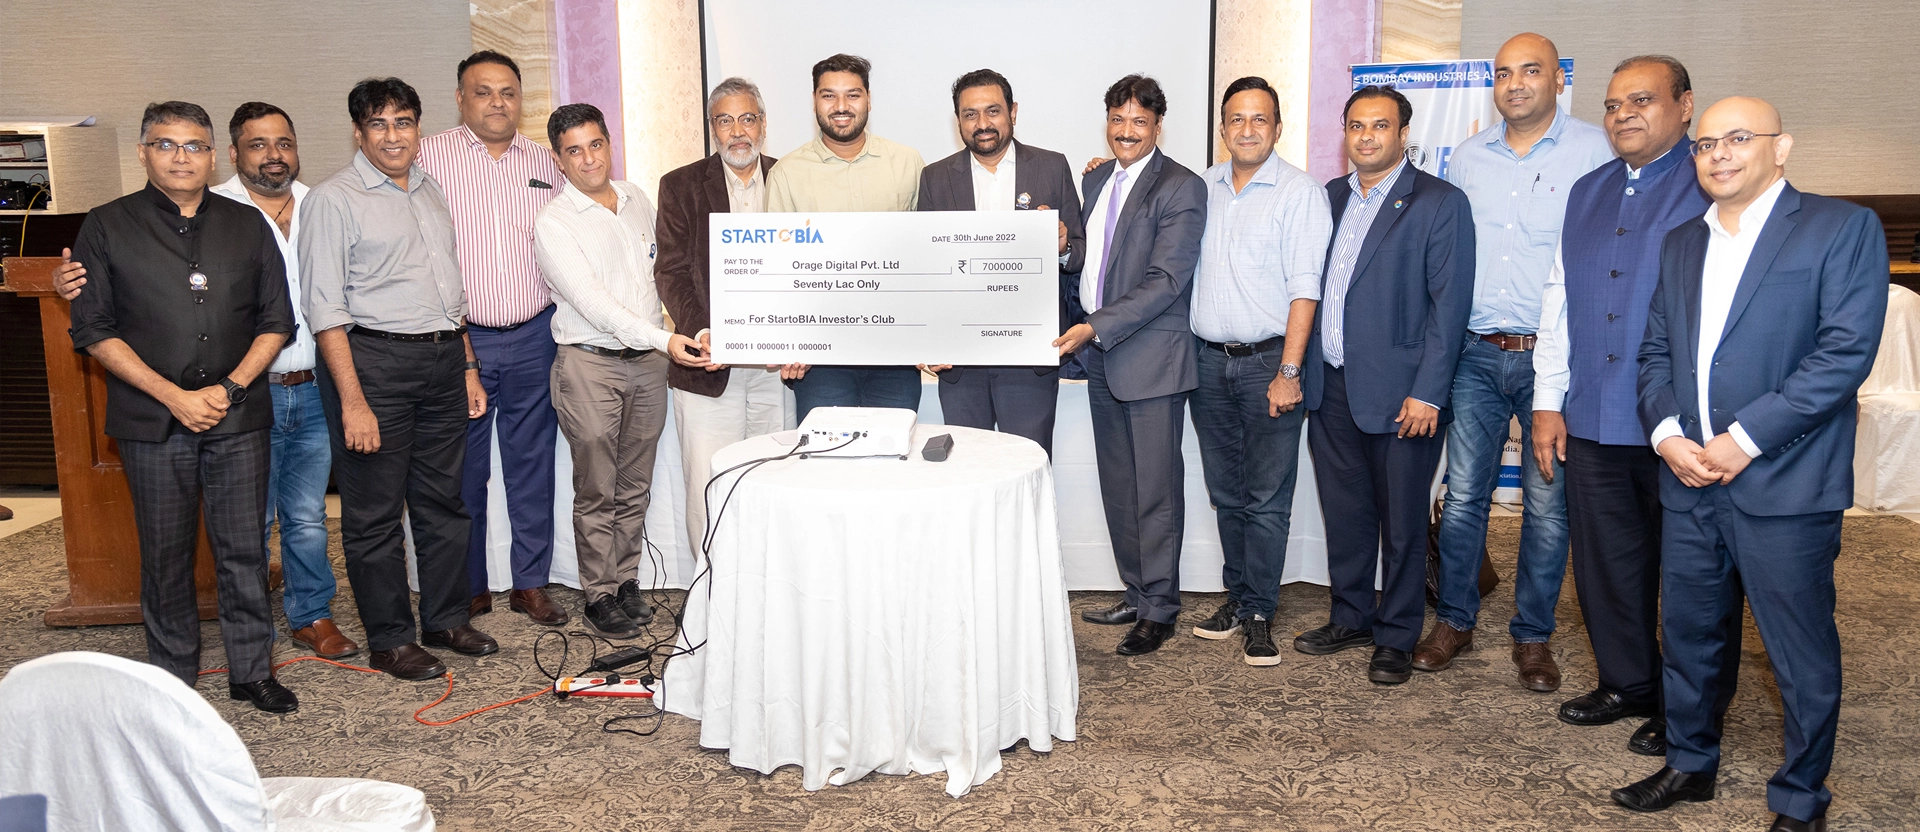 Mr. Nevil Sanghvi with his team and Investor club memebers during their 1st investment of startobia organised by Bombay Industries Association BIA